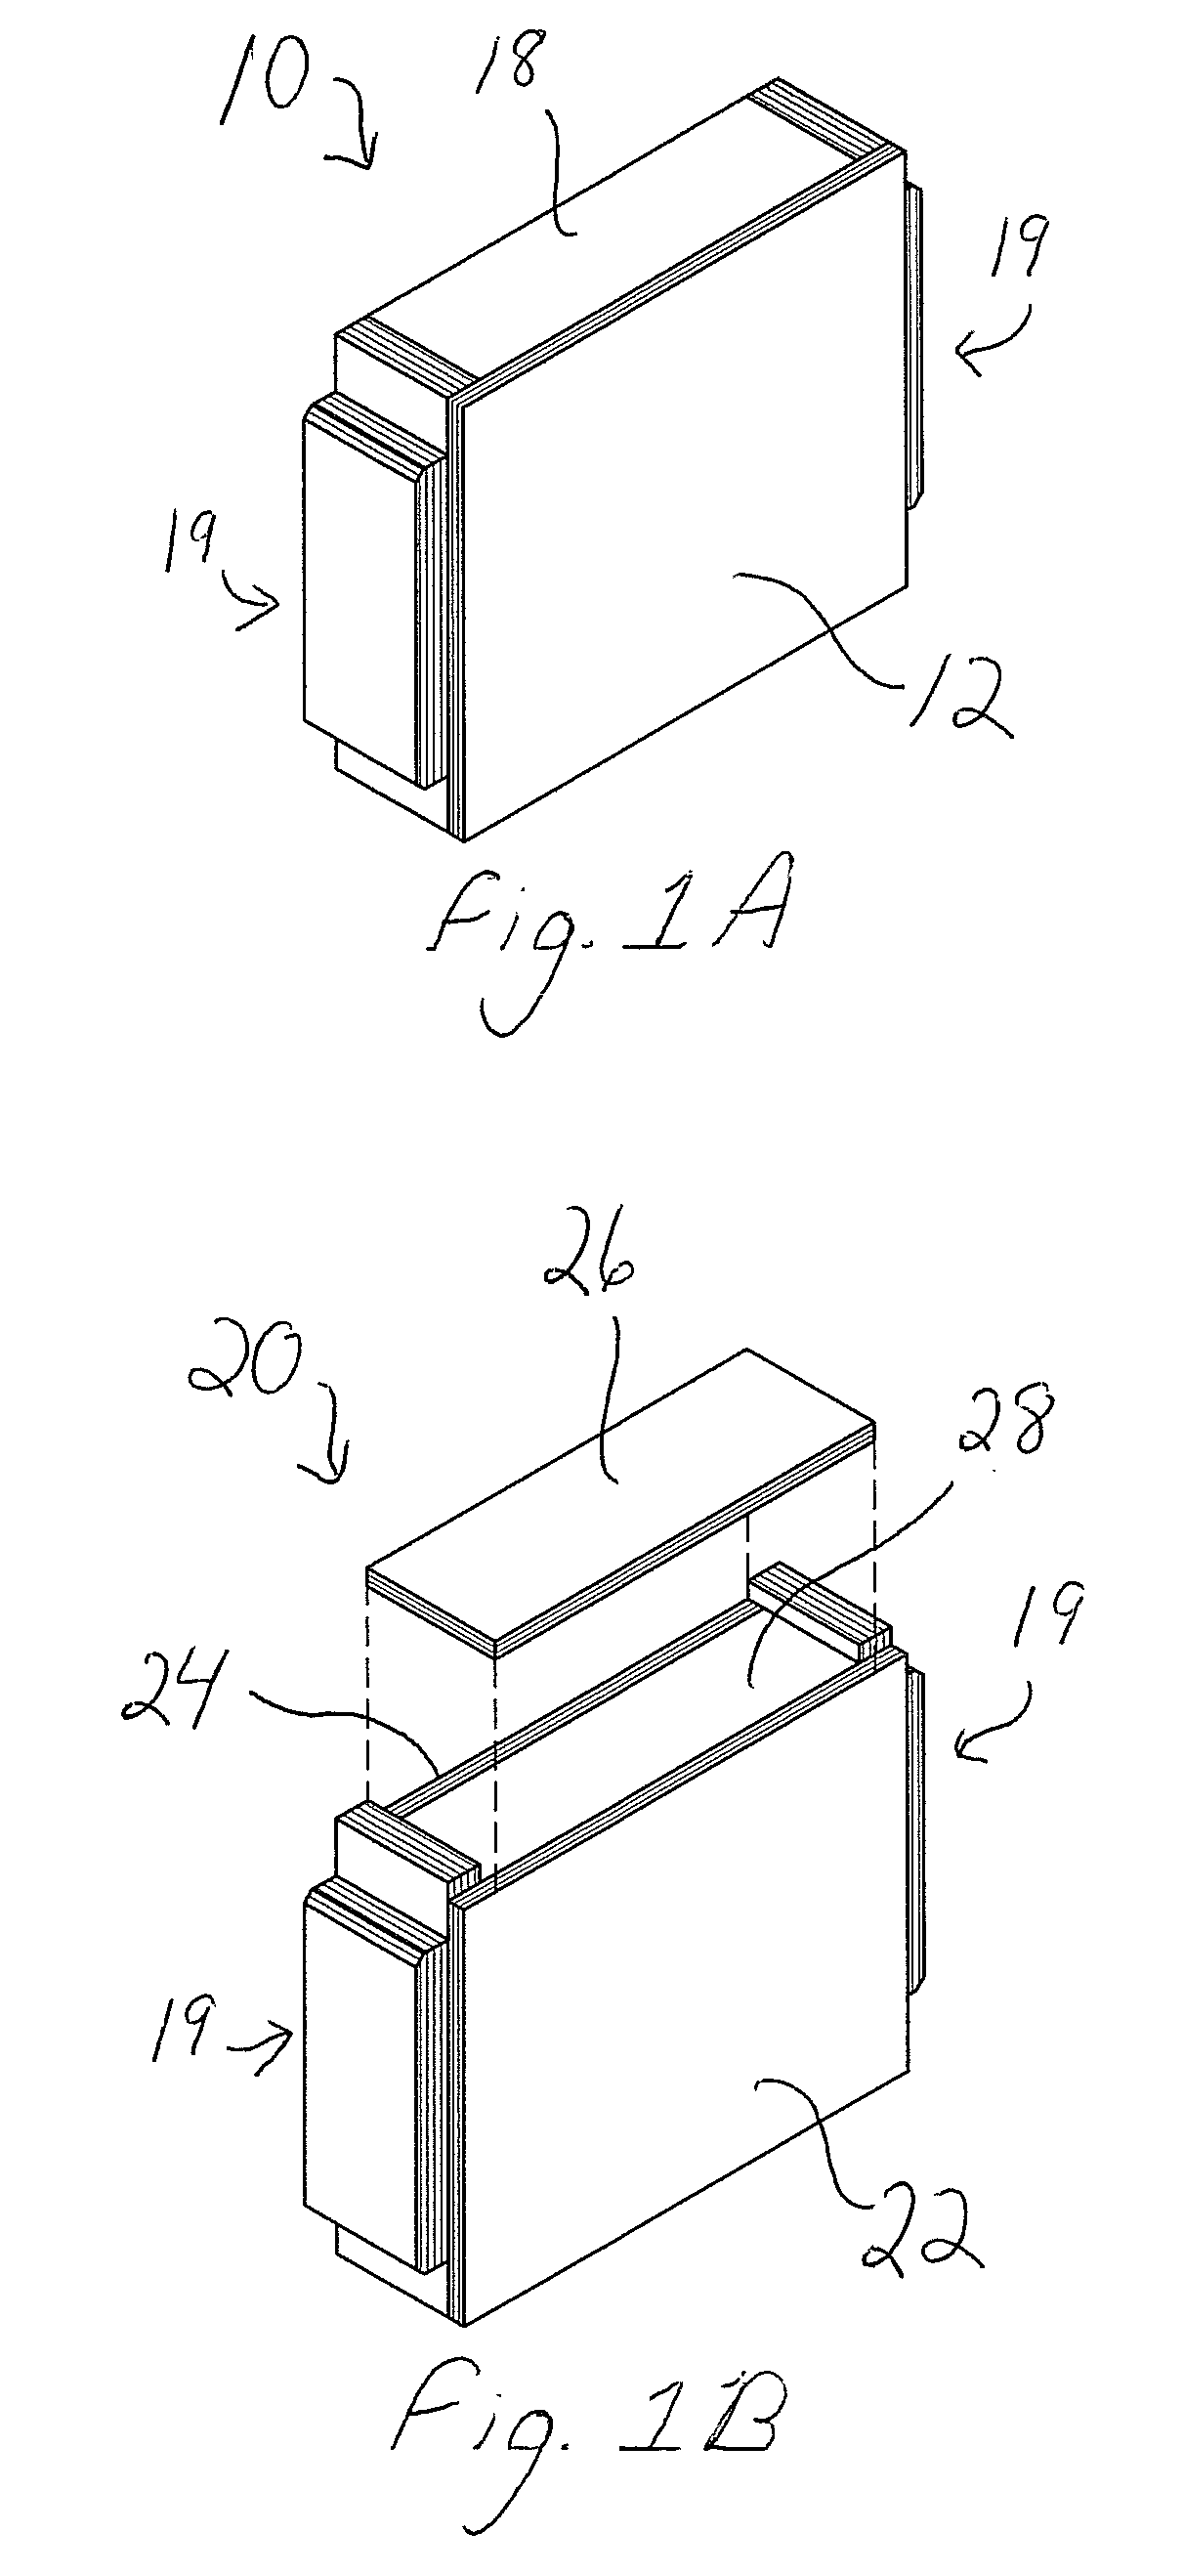 Insulated blocking panels and assemblies for I-joist installation in floors and ceilings and methods of installing same